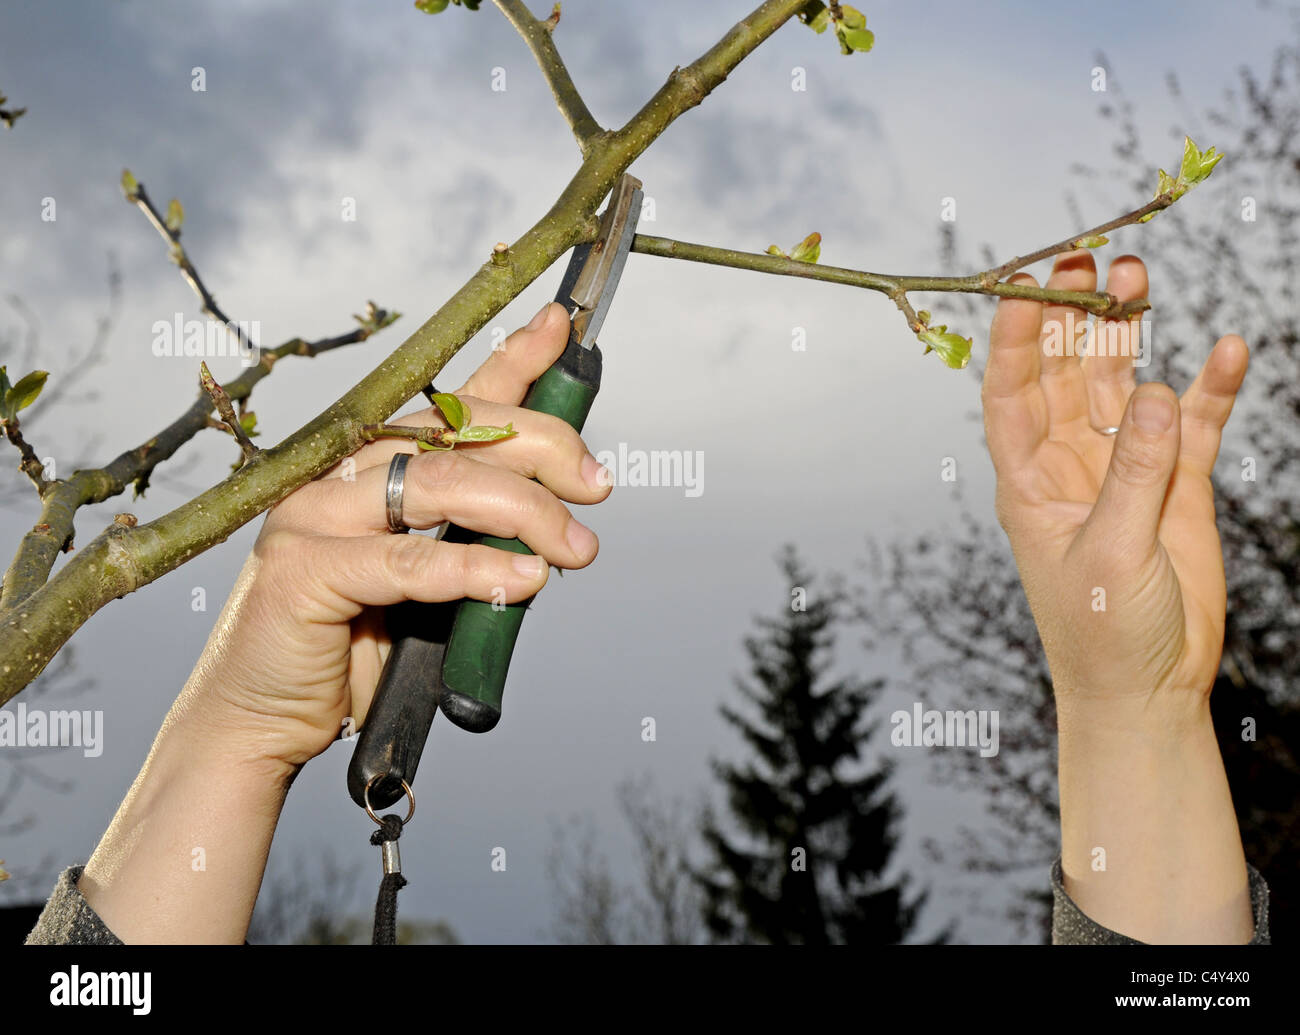 pruning shears and apple tree Stock Photo